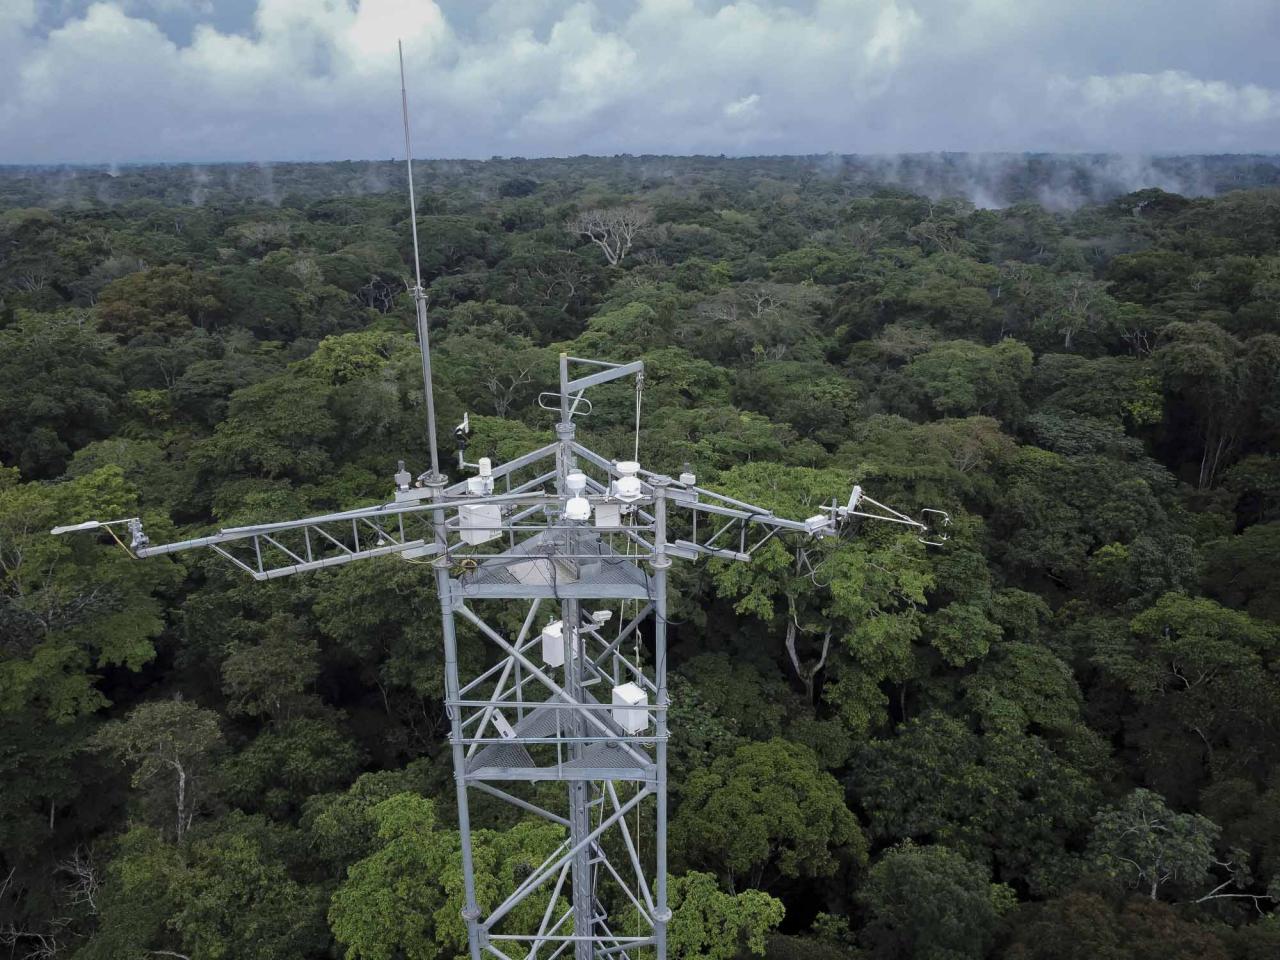 This aerial view shows trees in the Yangambi forest with the Flux Tower, 100 km from the city of Kisangani, in the Tshopo province, northeast of the Democratic Republic of the Congo on September 2, 2022. - The 55-meter high Flux Tower, which quantifies the carbon, absorbed or emitted by the forest, stands in the lush setting of the Yangambi biosphere reserve, which covers some 250,000 hectares along the Congo River, in the province of Tshopo. (Photo by Guerchom Ndebo / AFP)